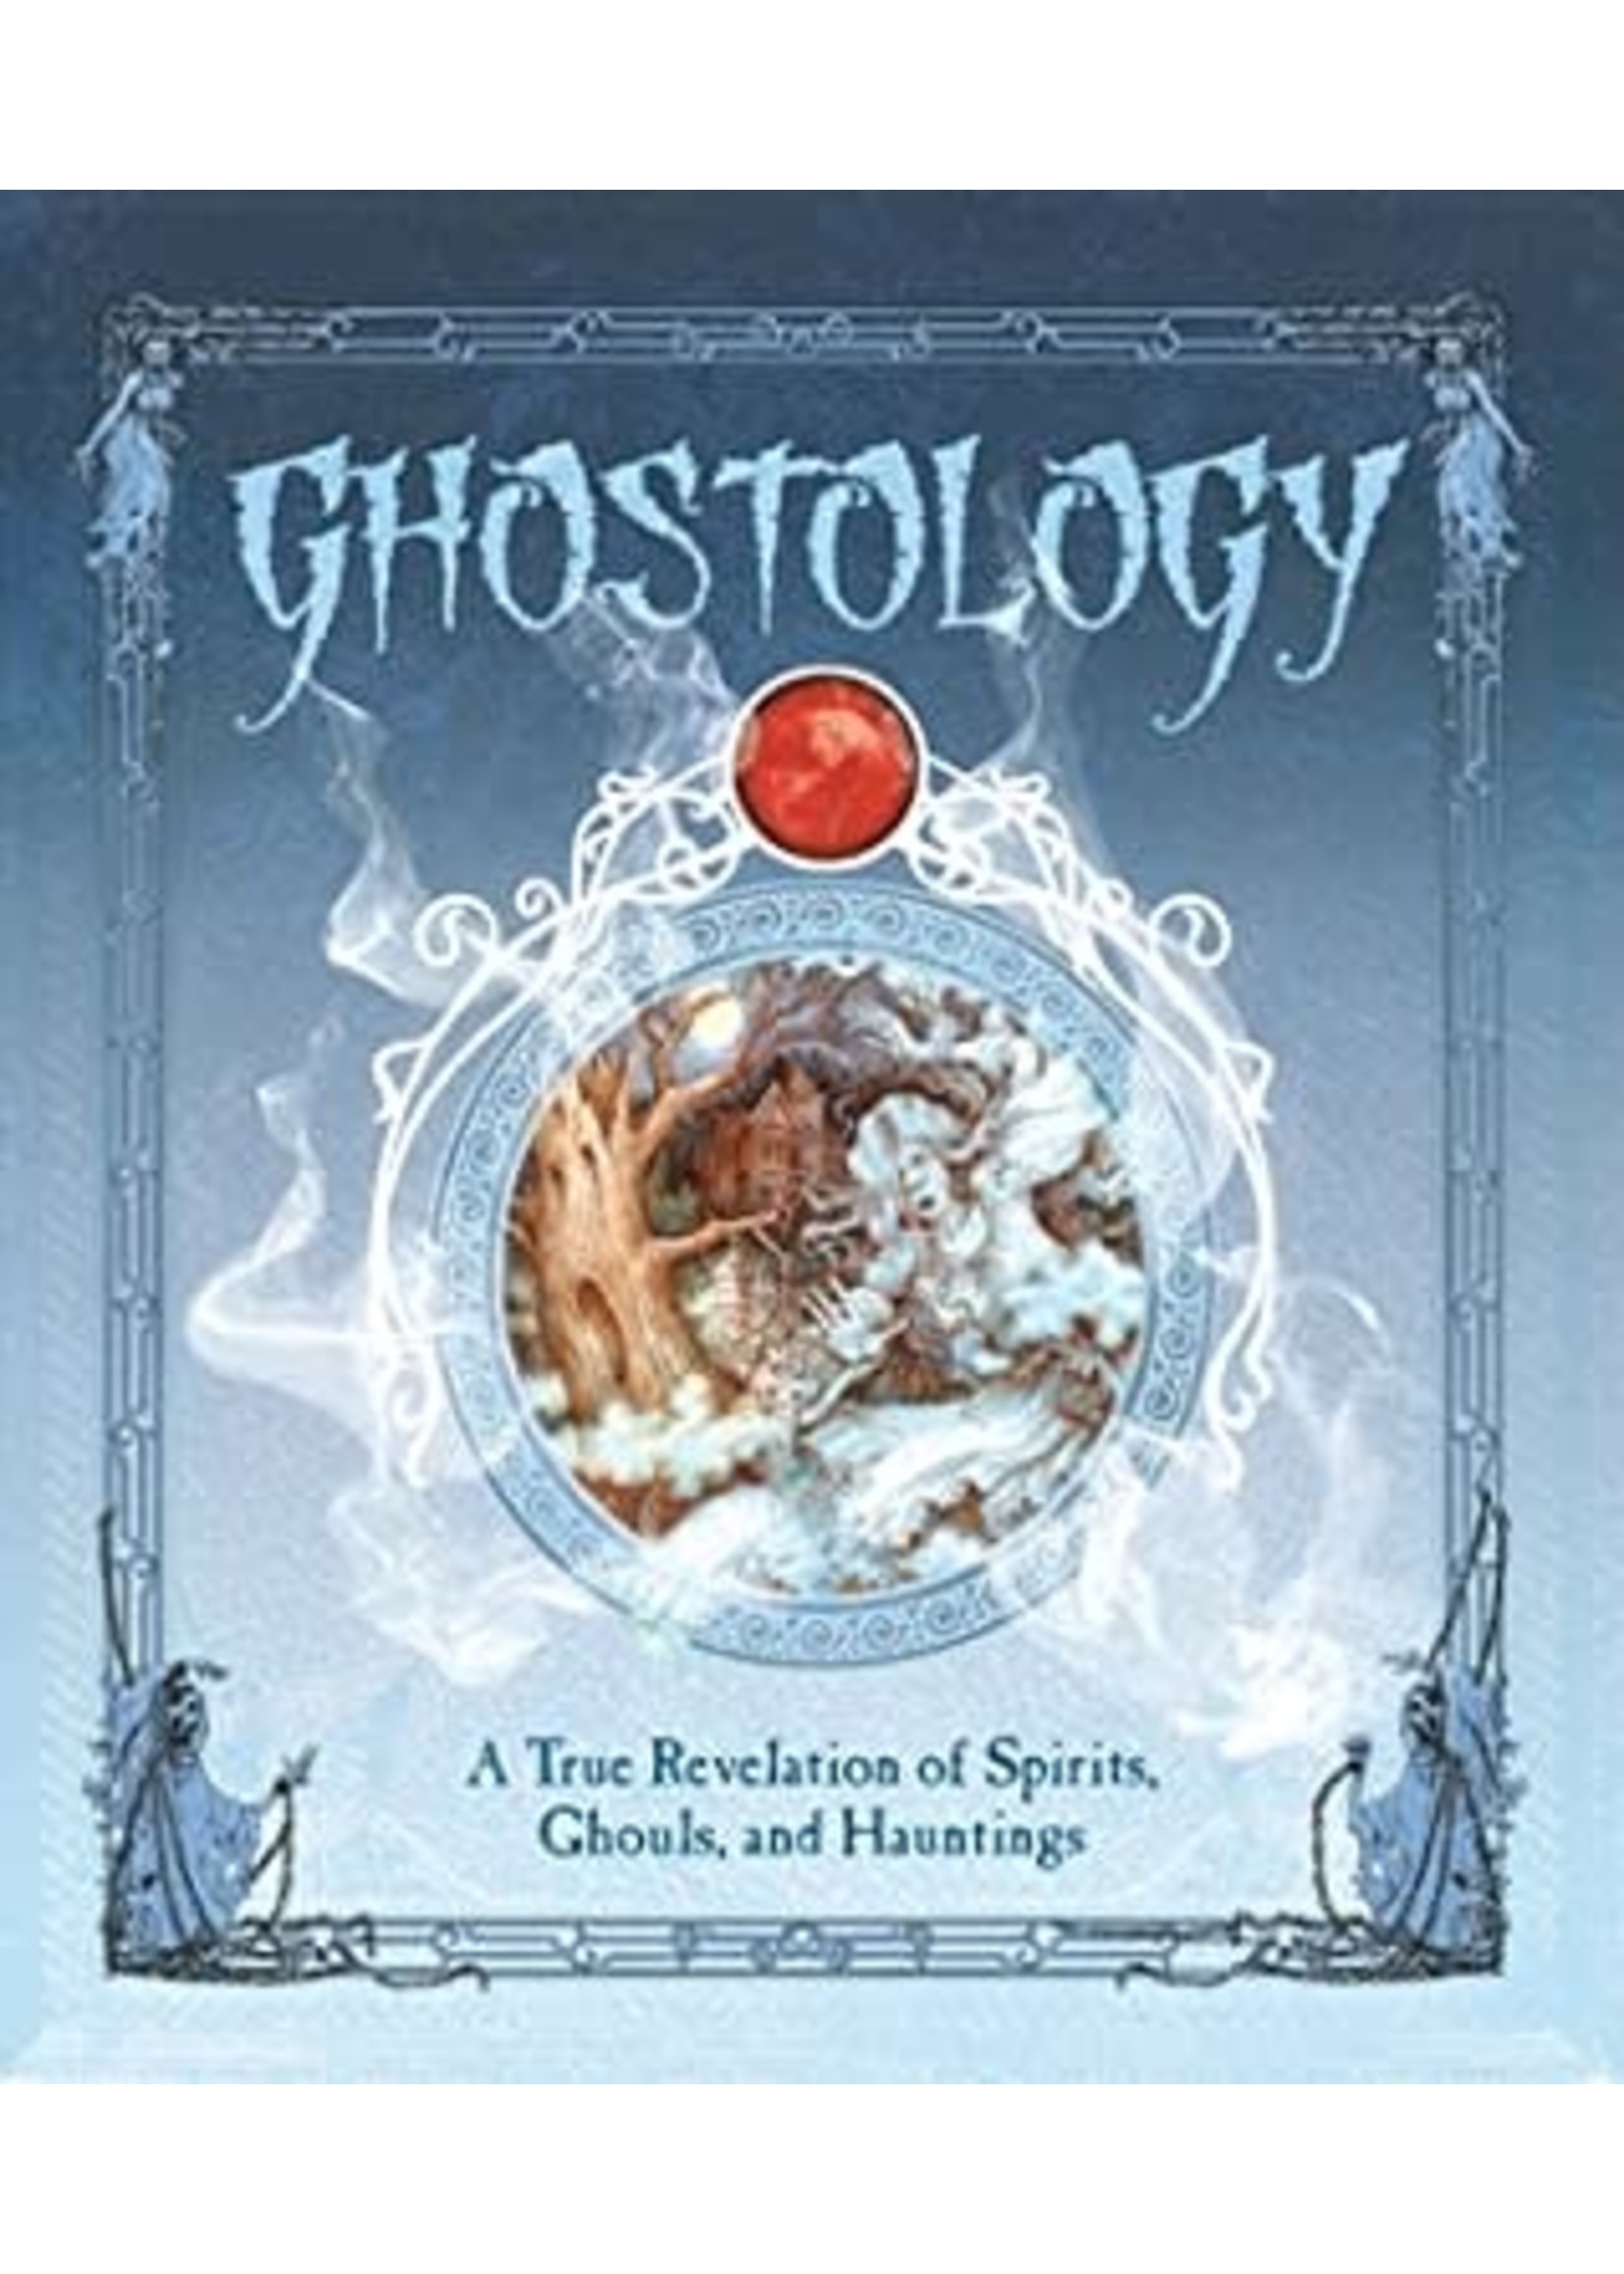 Ghostology: A True Revelation of Spirits, Ghouls, and Hauntings (Ologies #15) by Lucinda Curtle